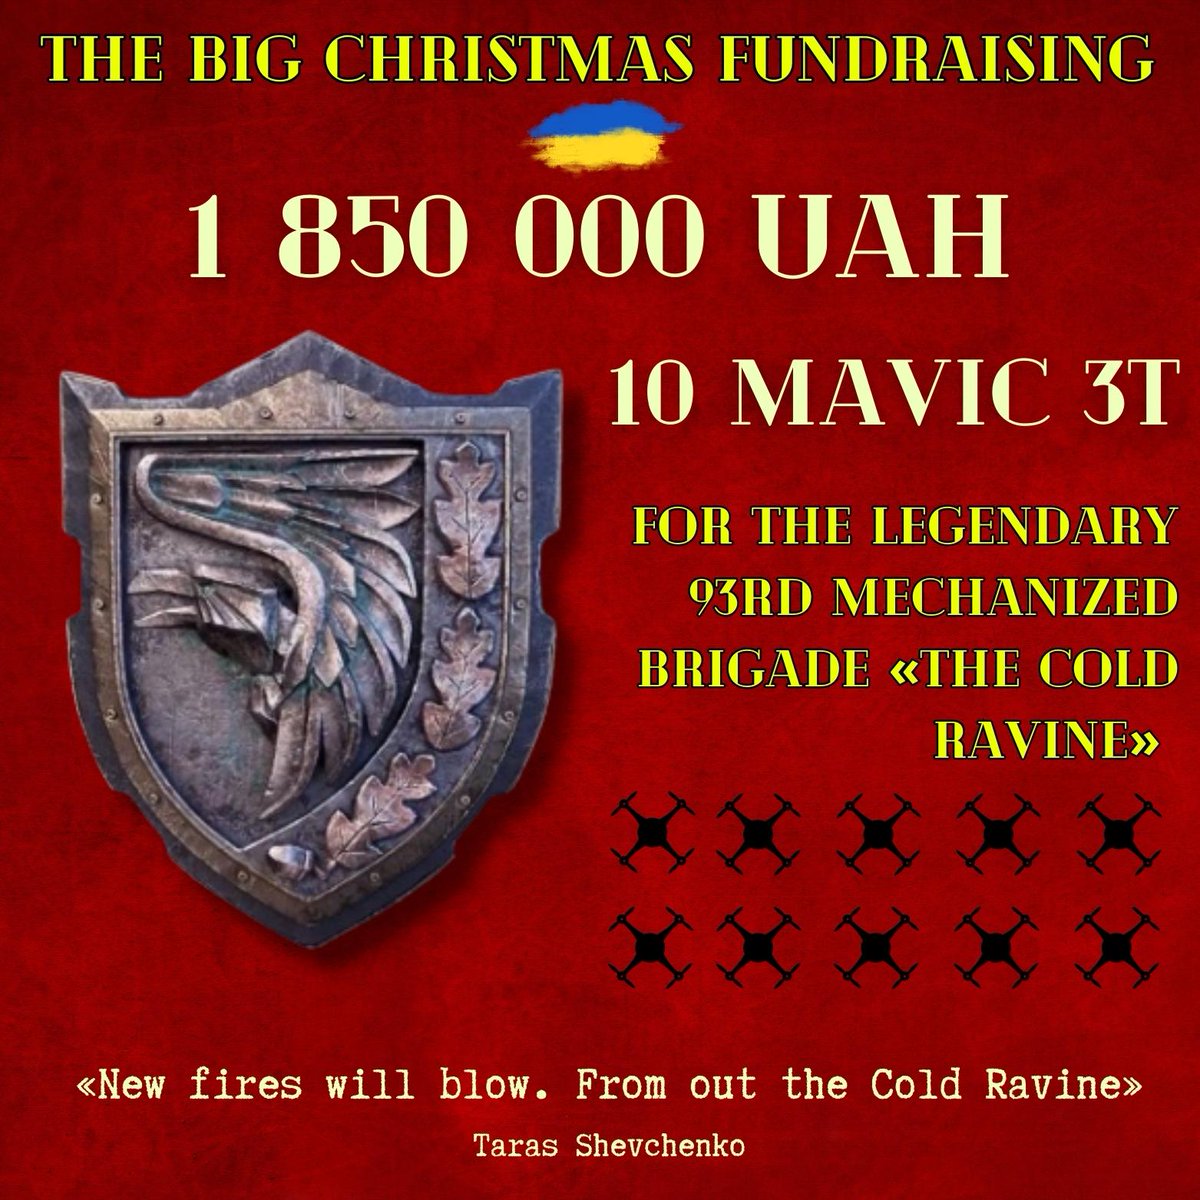 To my international friends.
We are launching a Christmas fundraiser for 10 drones for our military for the 93rd Brigade of the #UkrainianArmedForces. 
We will also be raffling off unique artifacts for particularly generous donators. 1\8

PayPal: facesofua@gmail.com